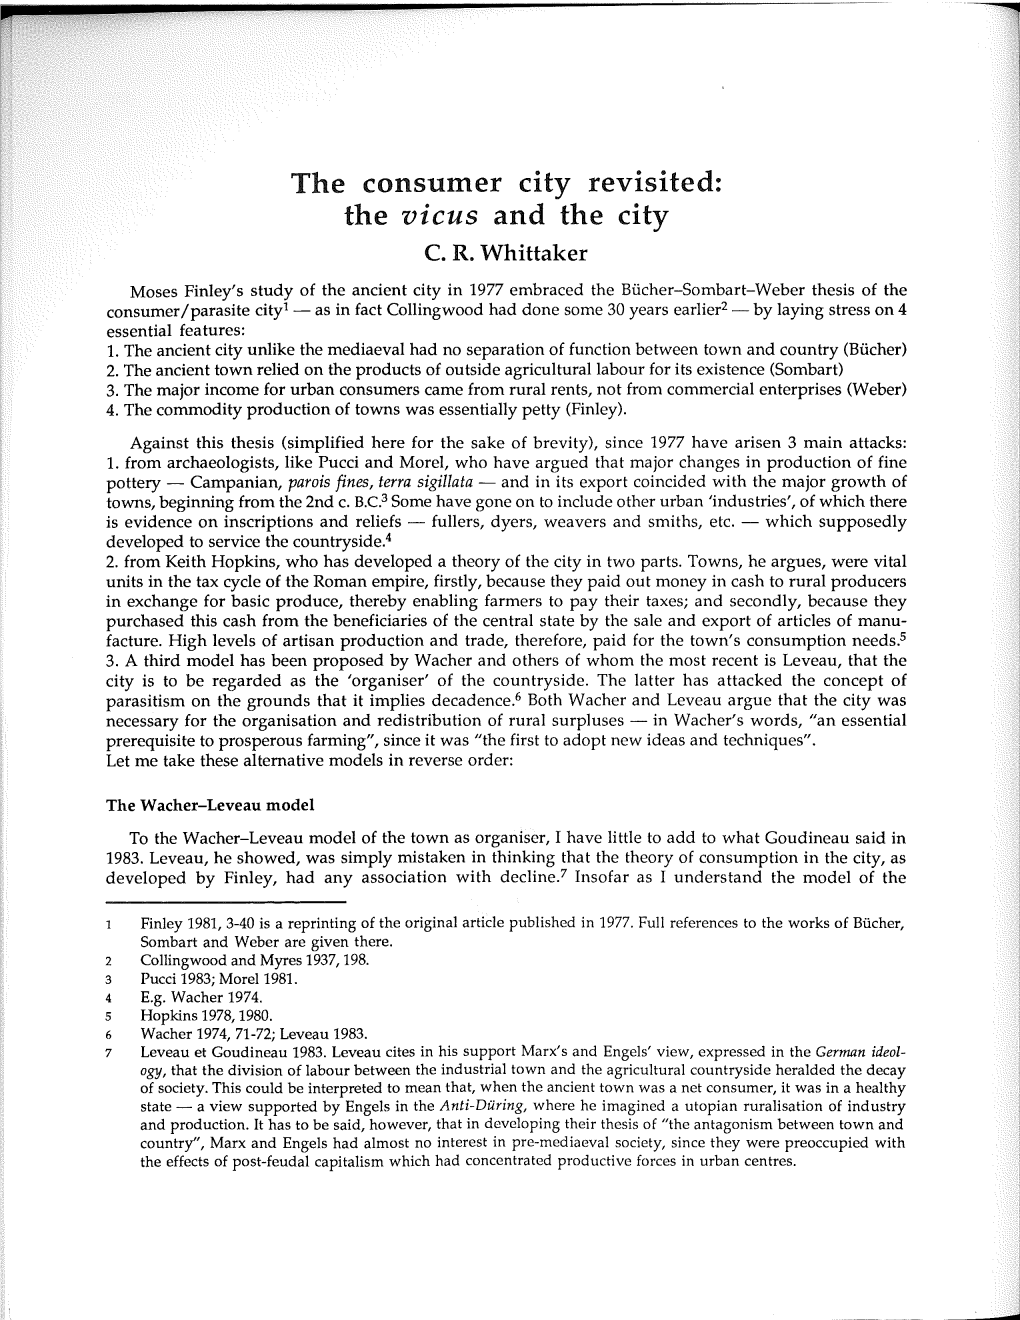 The Consumer City Revisited: the Vicus and the City C